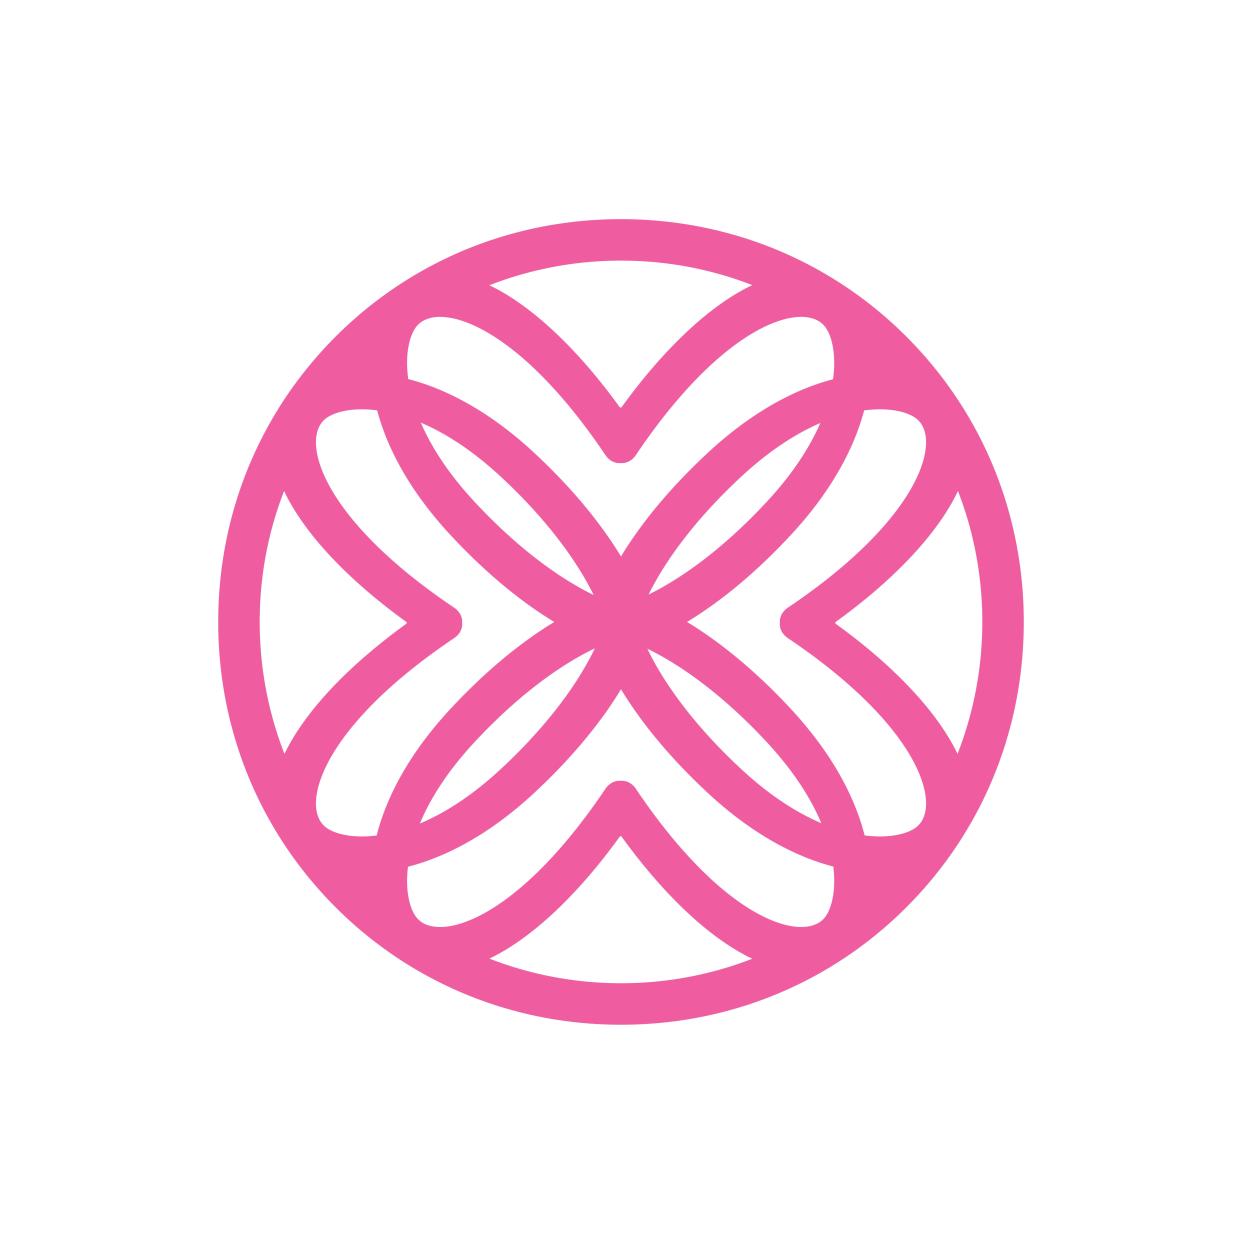 The new Lilly Pulitzer brandmark, which is designed to be reminiscent of a butterfly, is shown here.